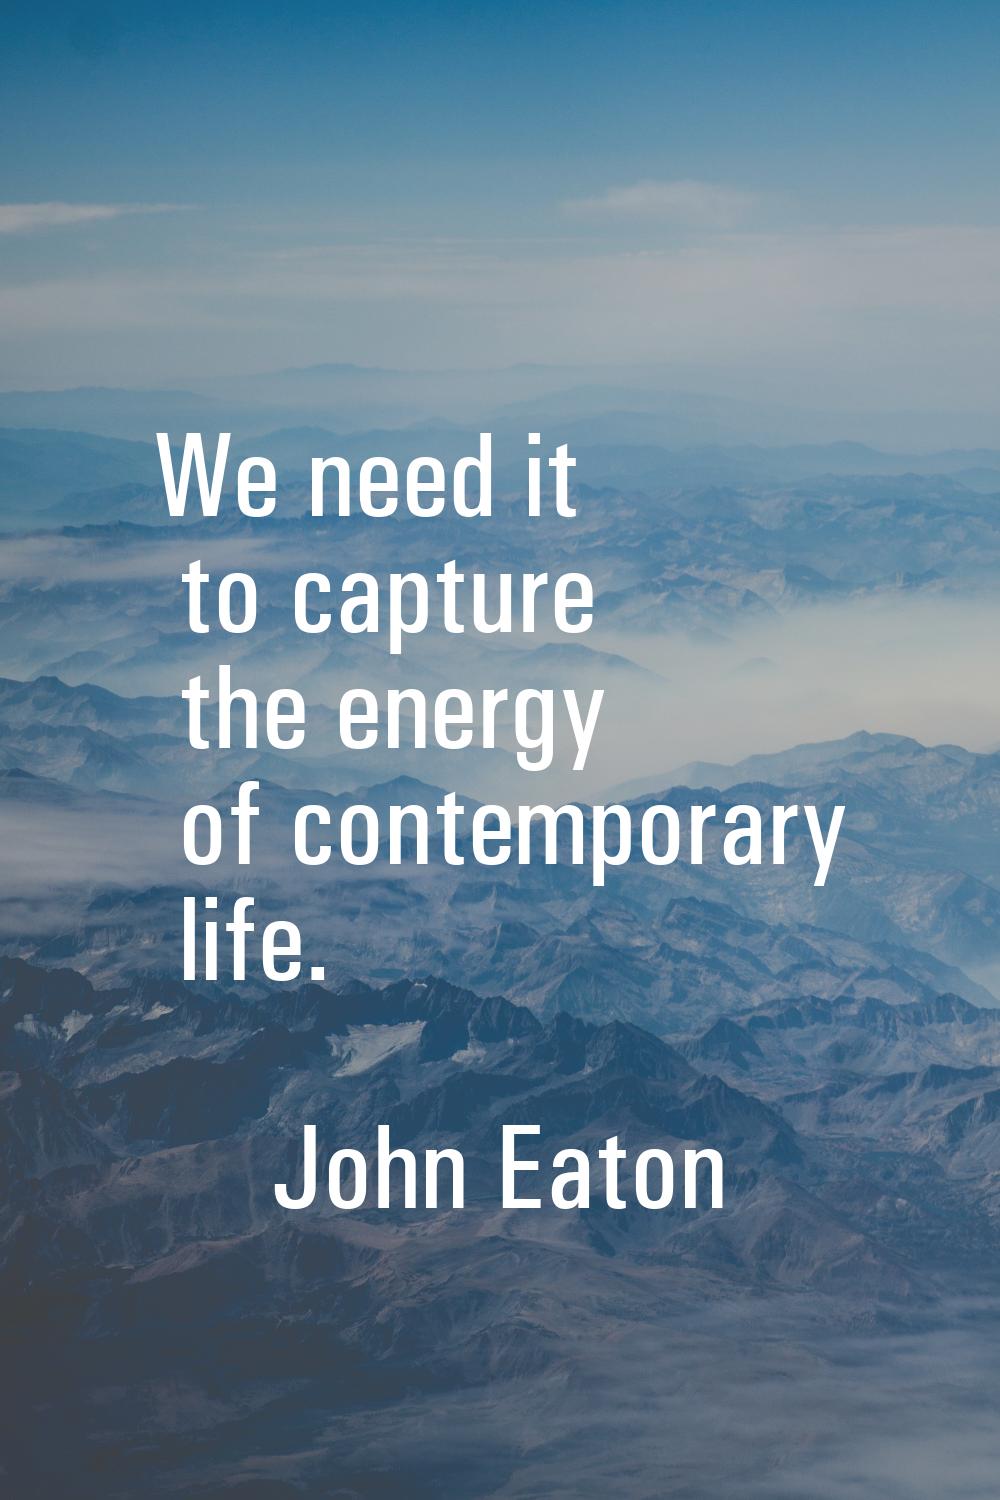 We need it to capture the energy of contemporary life.